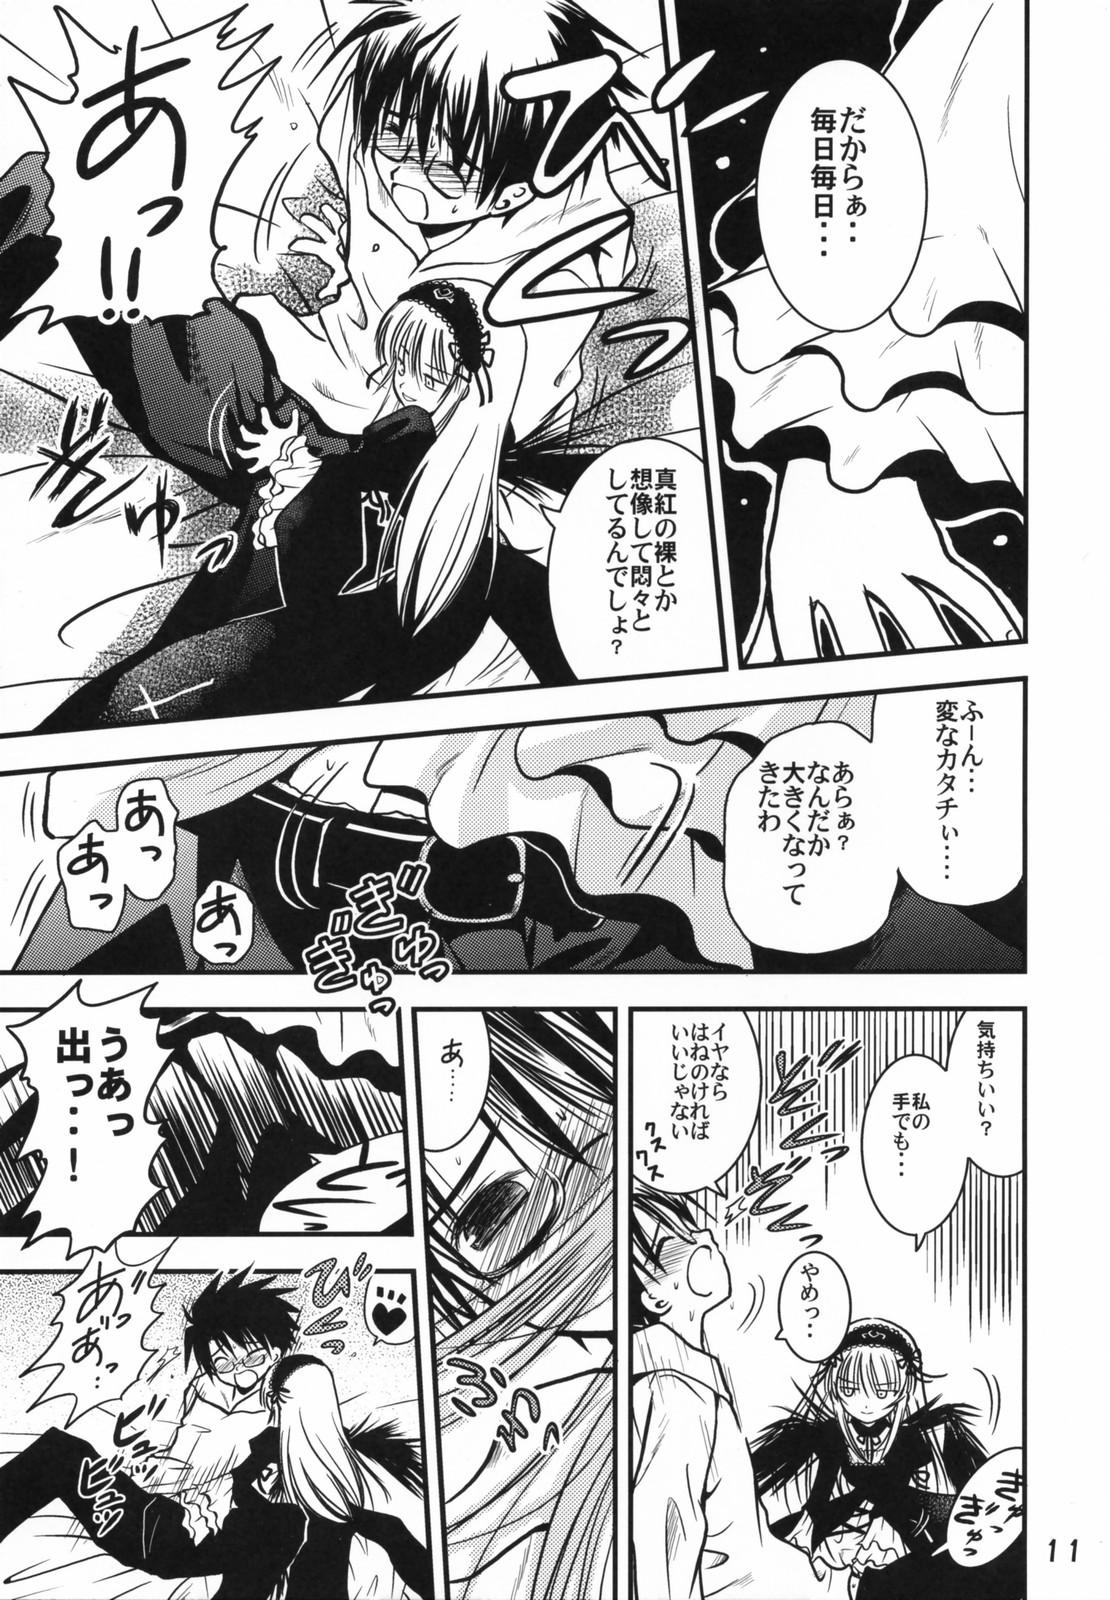 Lick A caprice - Rozen maiden Gay Shop - Page 10